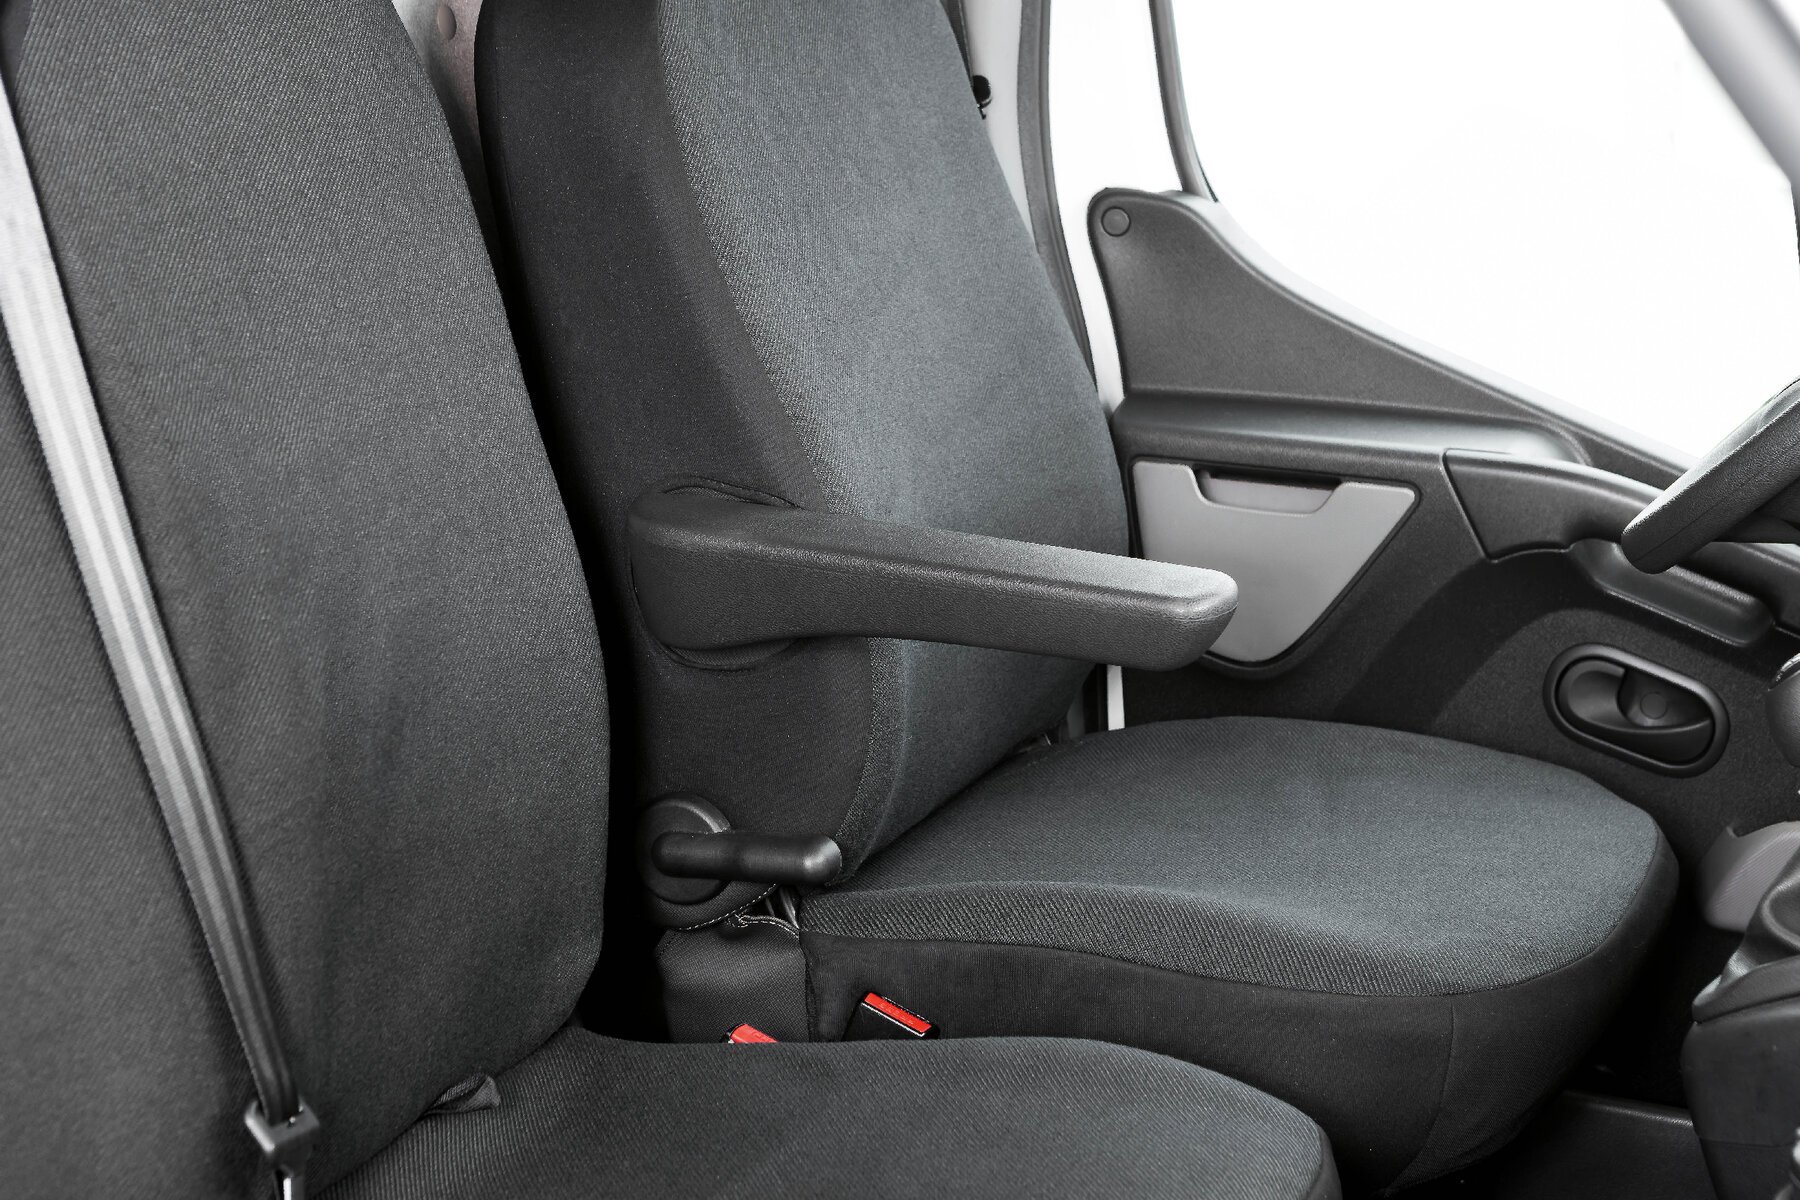 Seat cover made of fabric for Opel Movano, Renault Master, Nissan Interstar, single seat cover, double seat cover